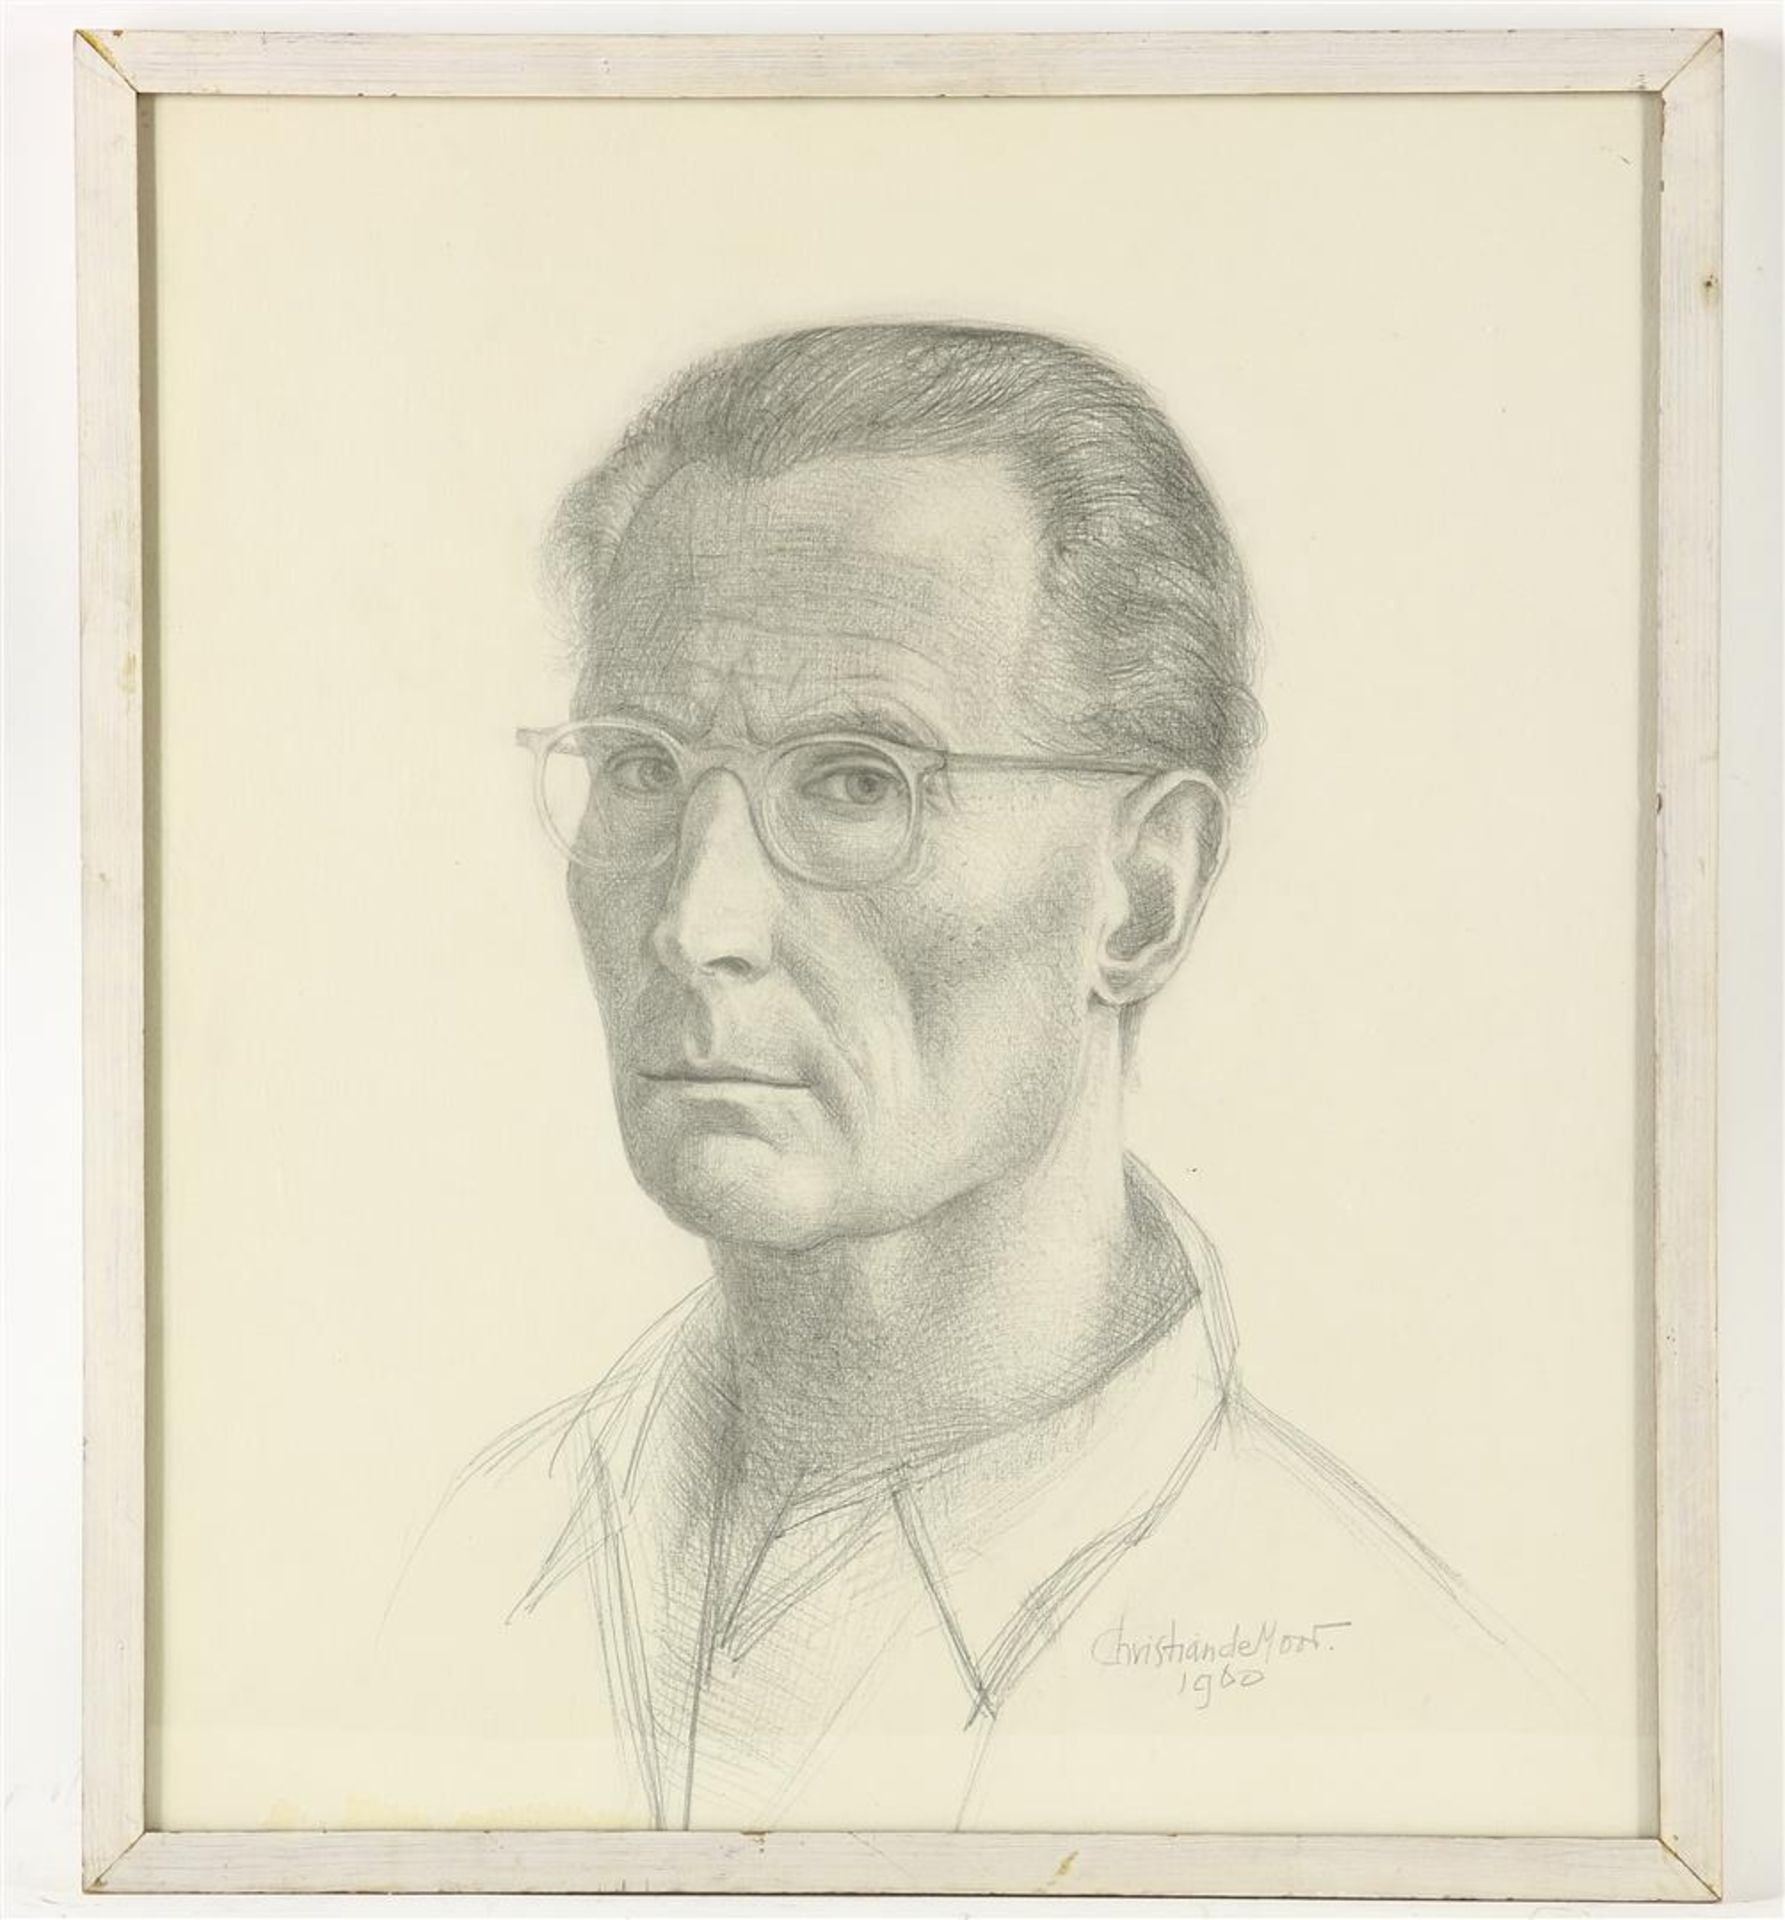 Christian de Moor (1899-1981) Self-portrait, signed and dated 1960 lower right. pencil drawing, 55 x - Image 2 of 4